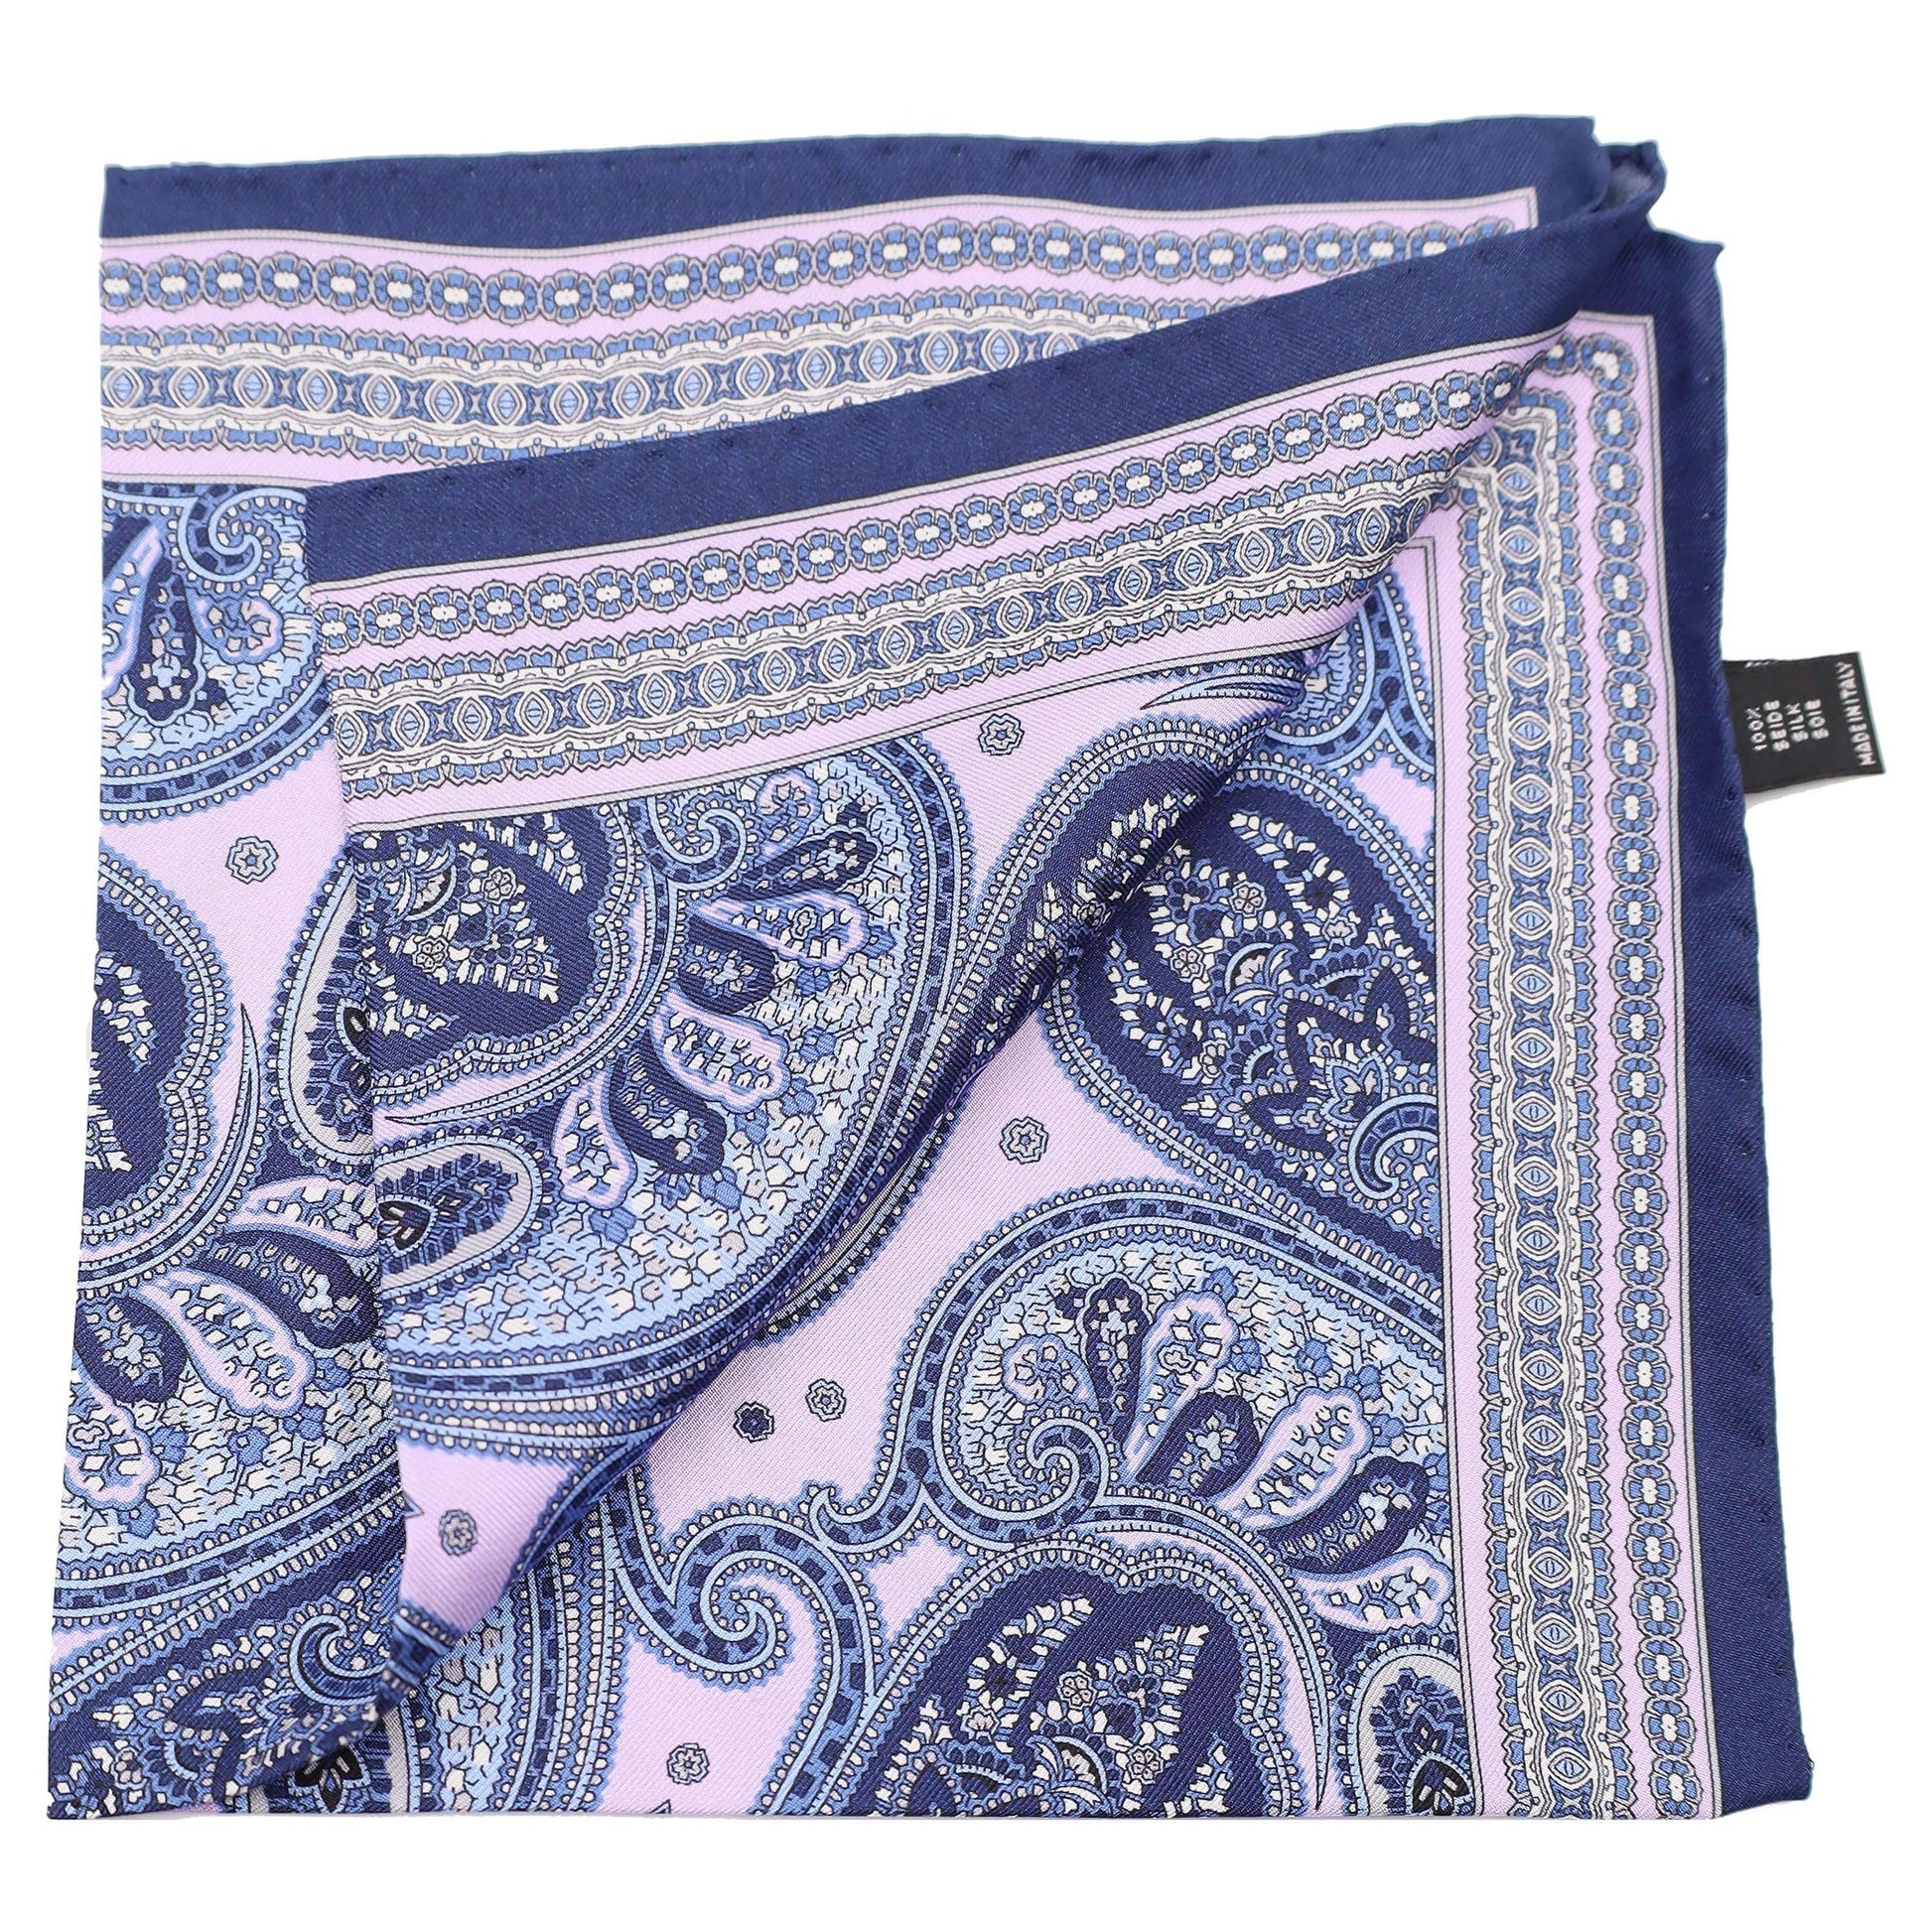 Blue Paisley on Pink background Silk Pocket Square - Just White Shirts